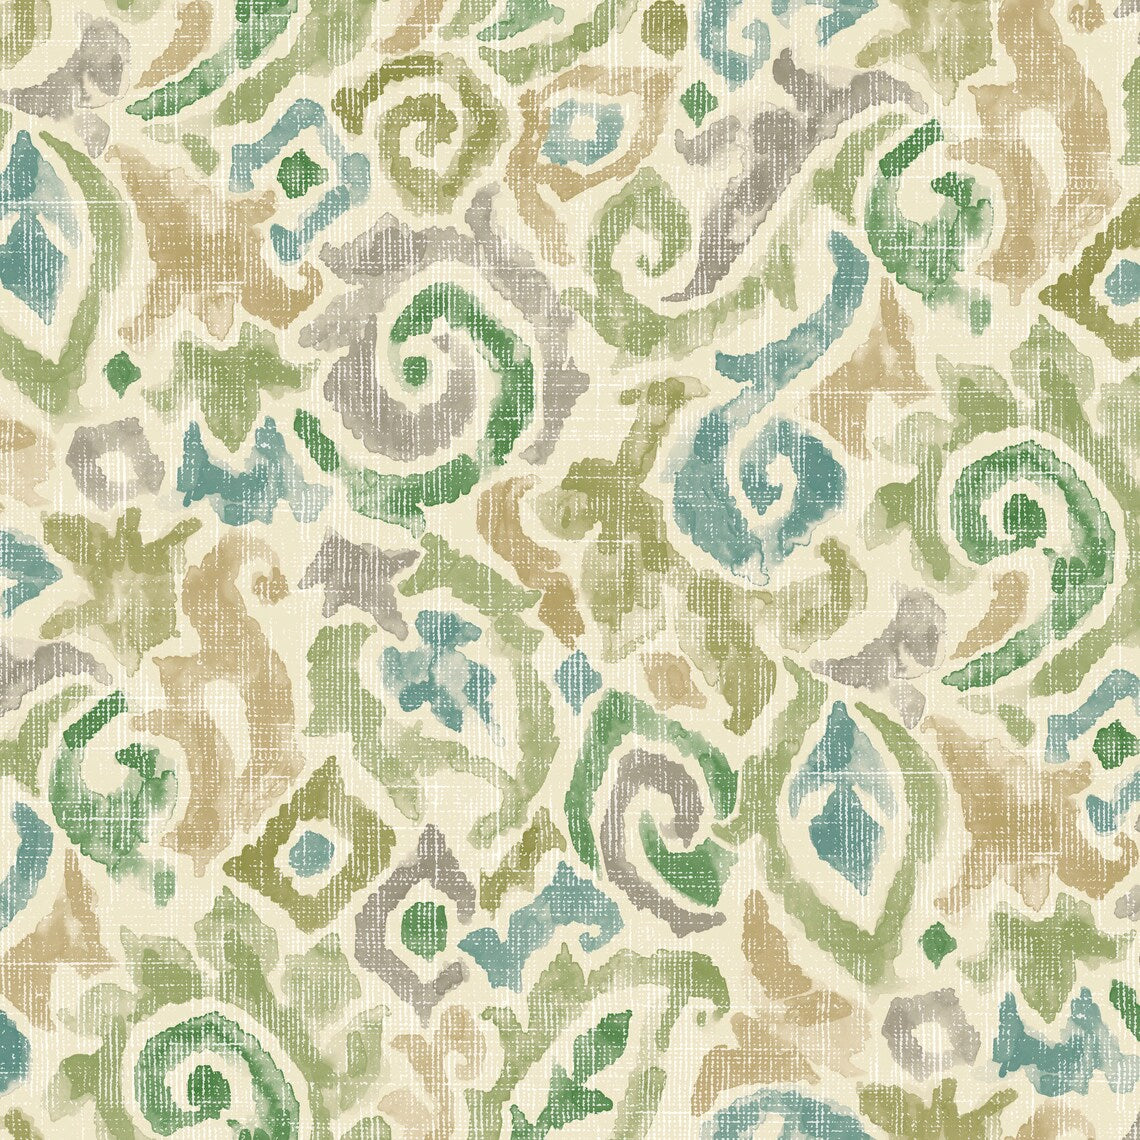 rod pocket curtain panels pair in Jester Bay Green Paisley Watercolor